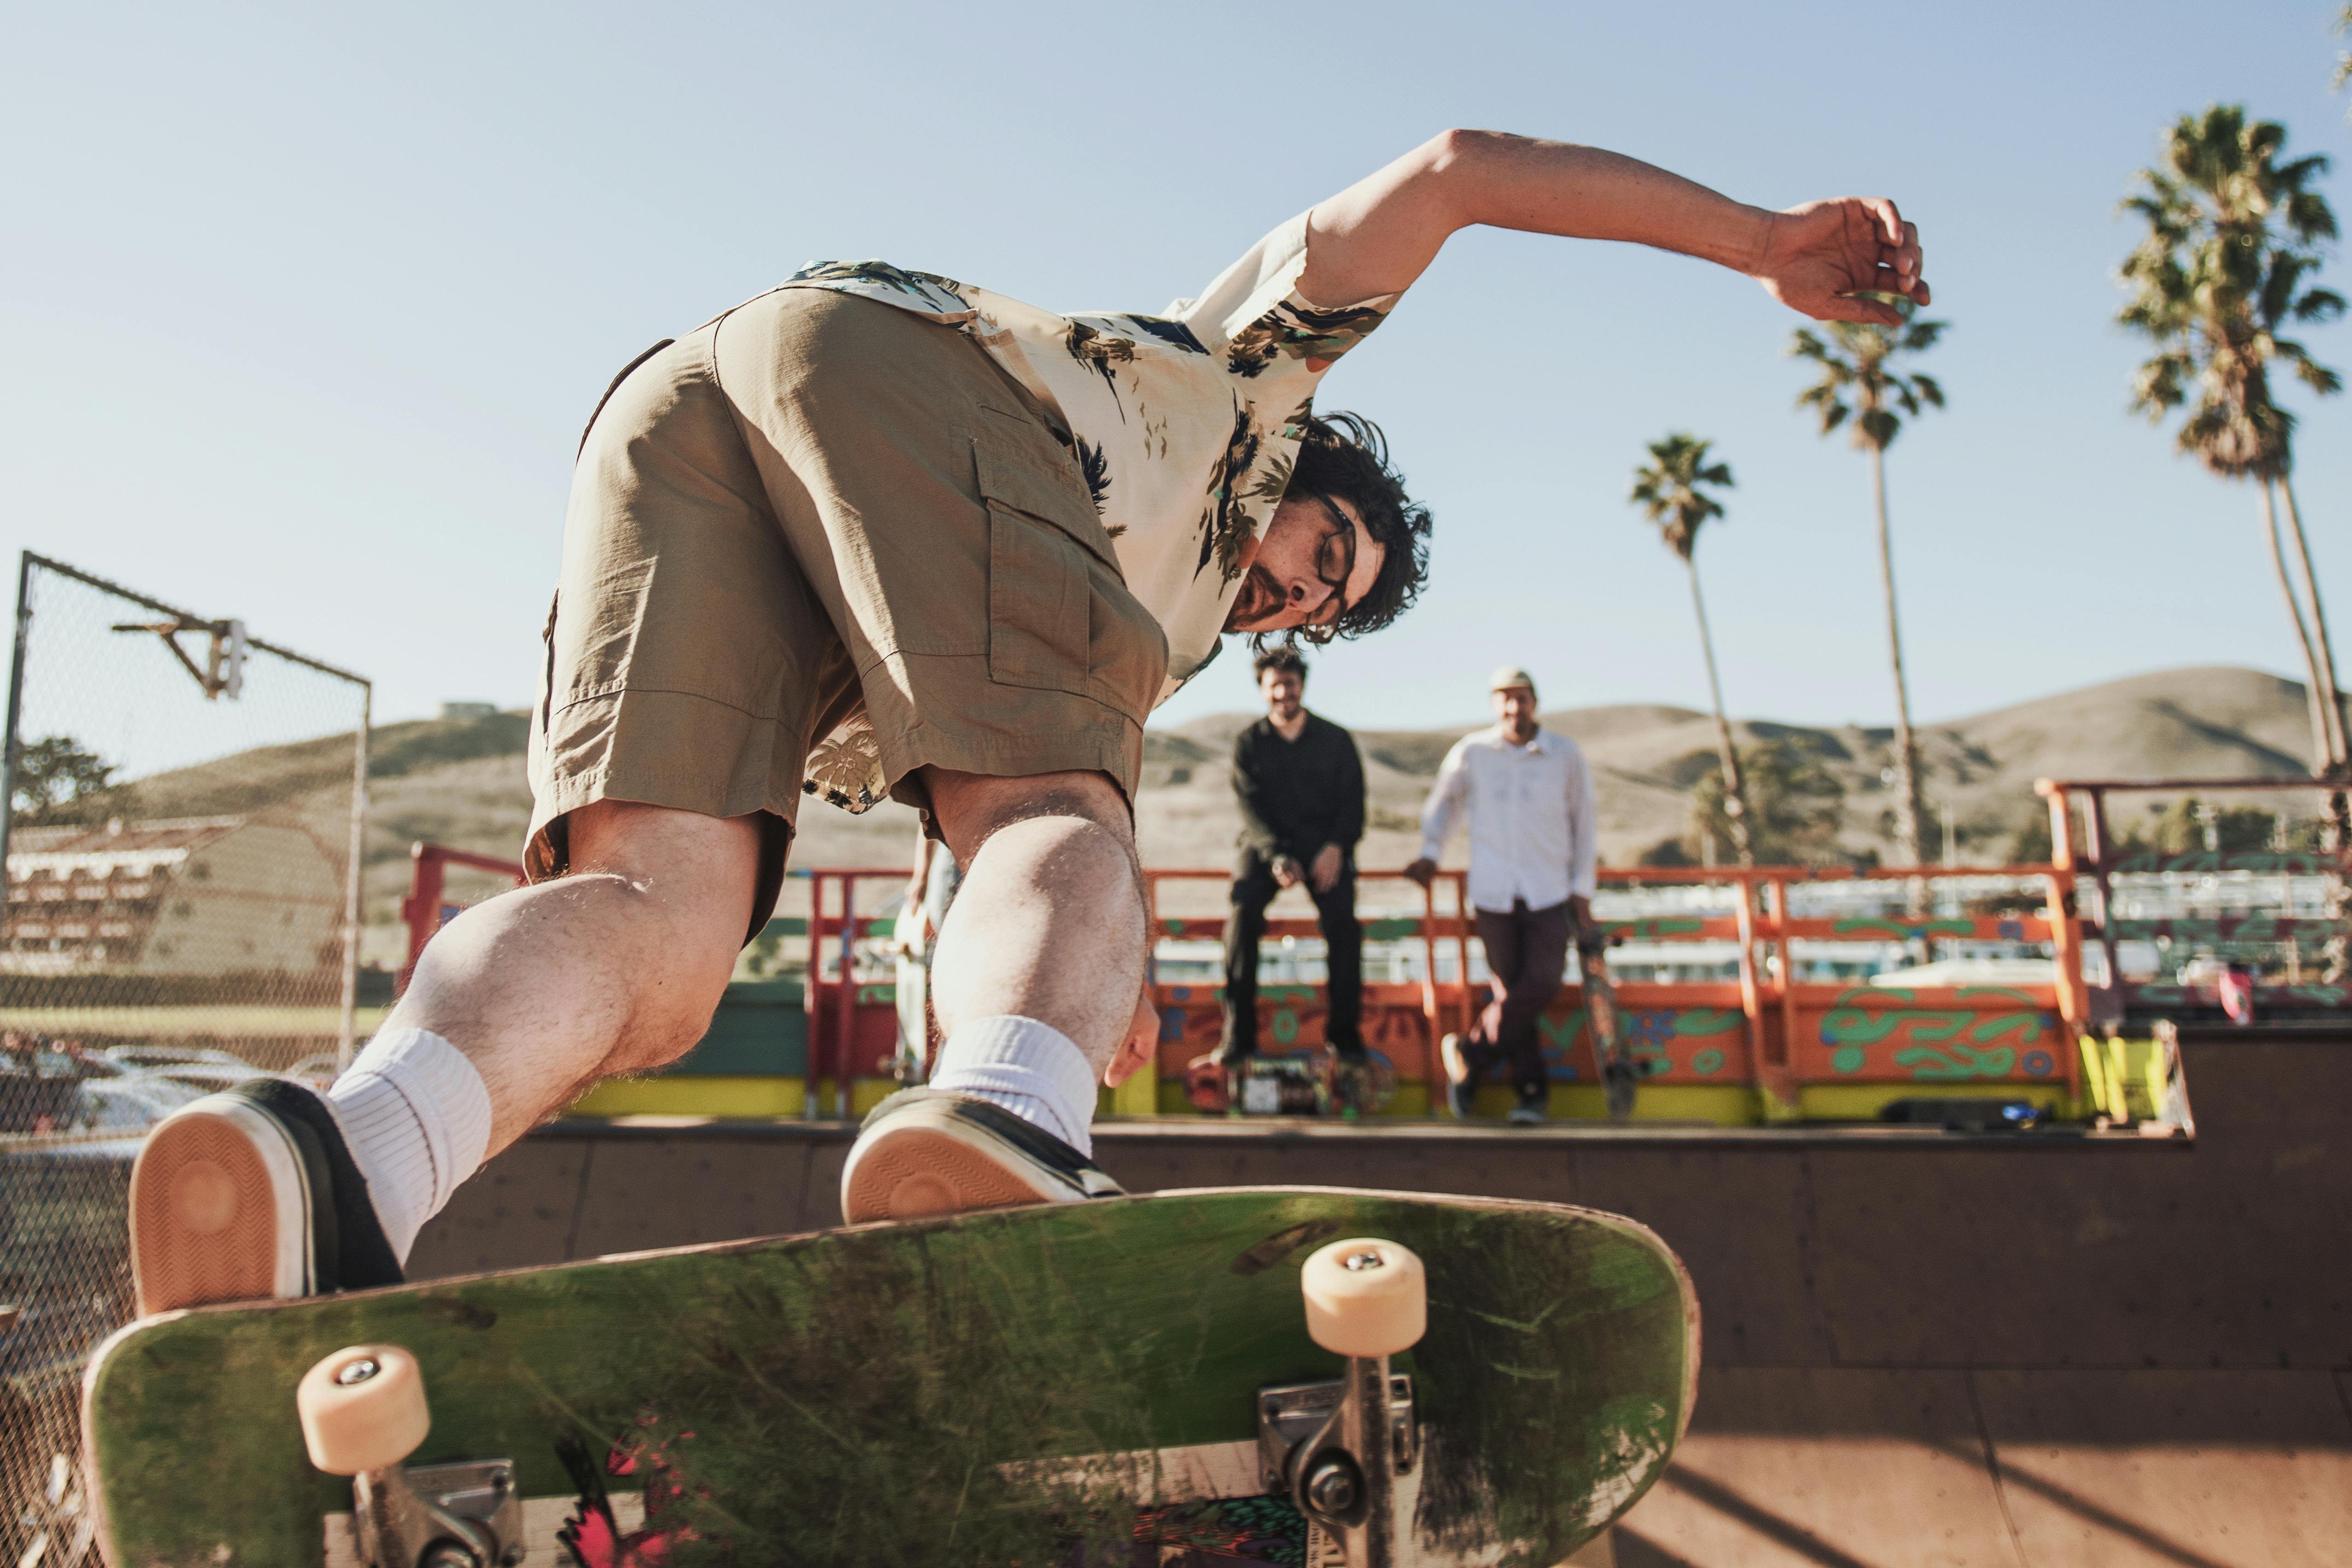 Time Lapse Photography of Man Doing Skateboard Trick · Free Stock Photo